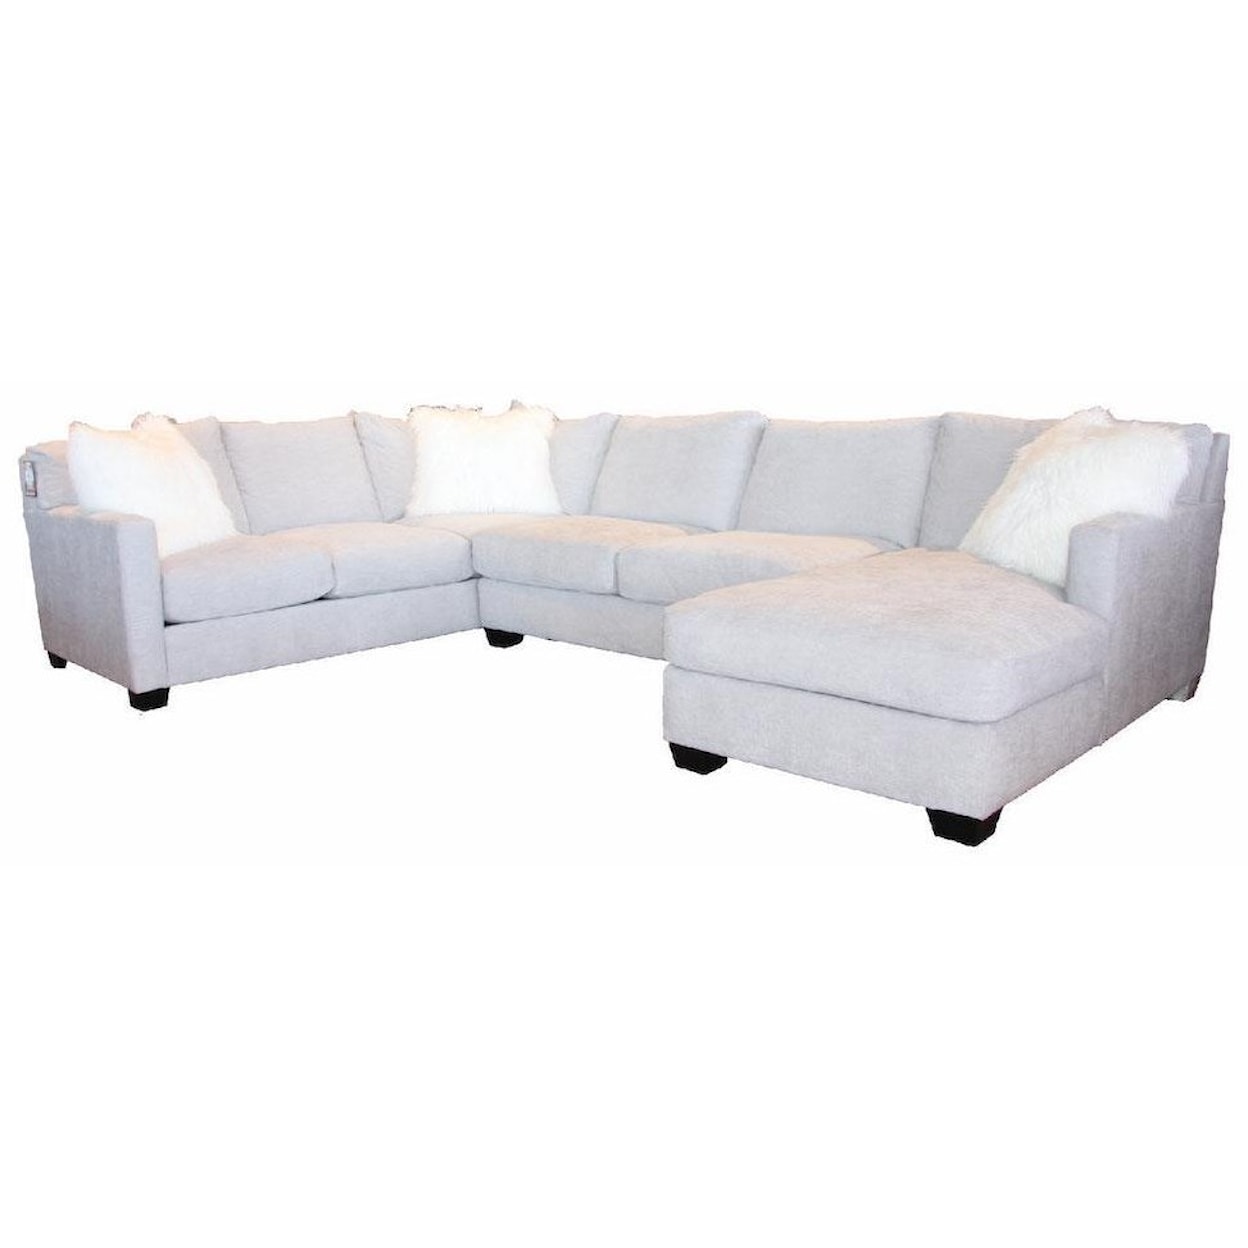 JMD Furniture 1300 3 PC Down Sectional